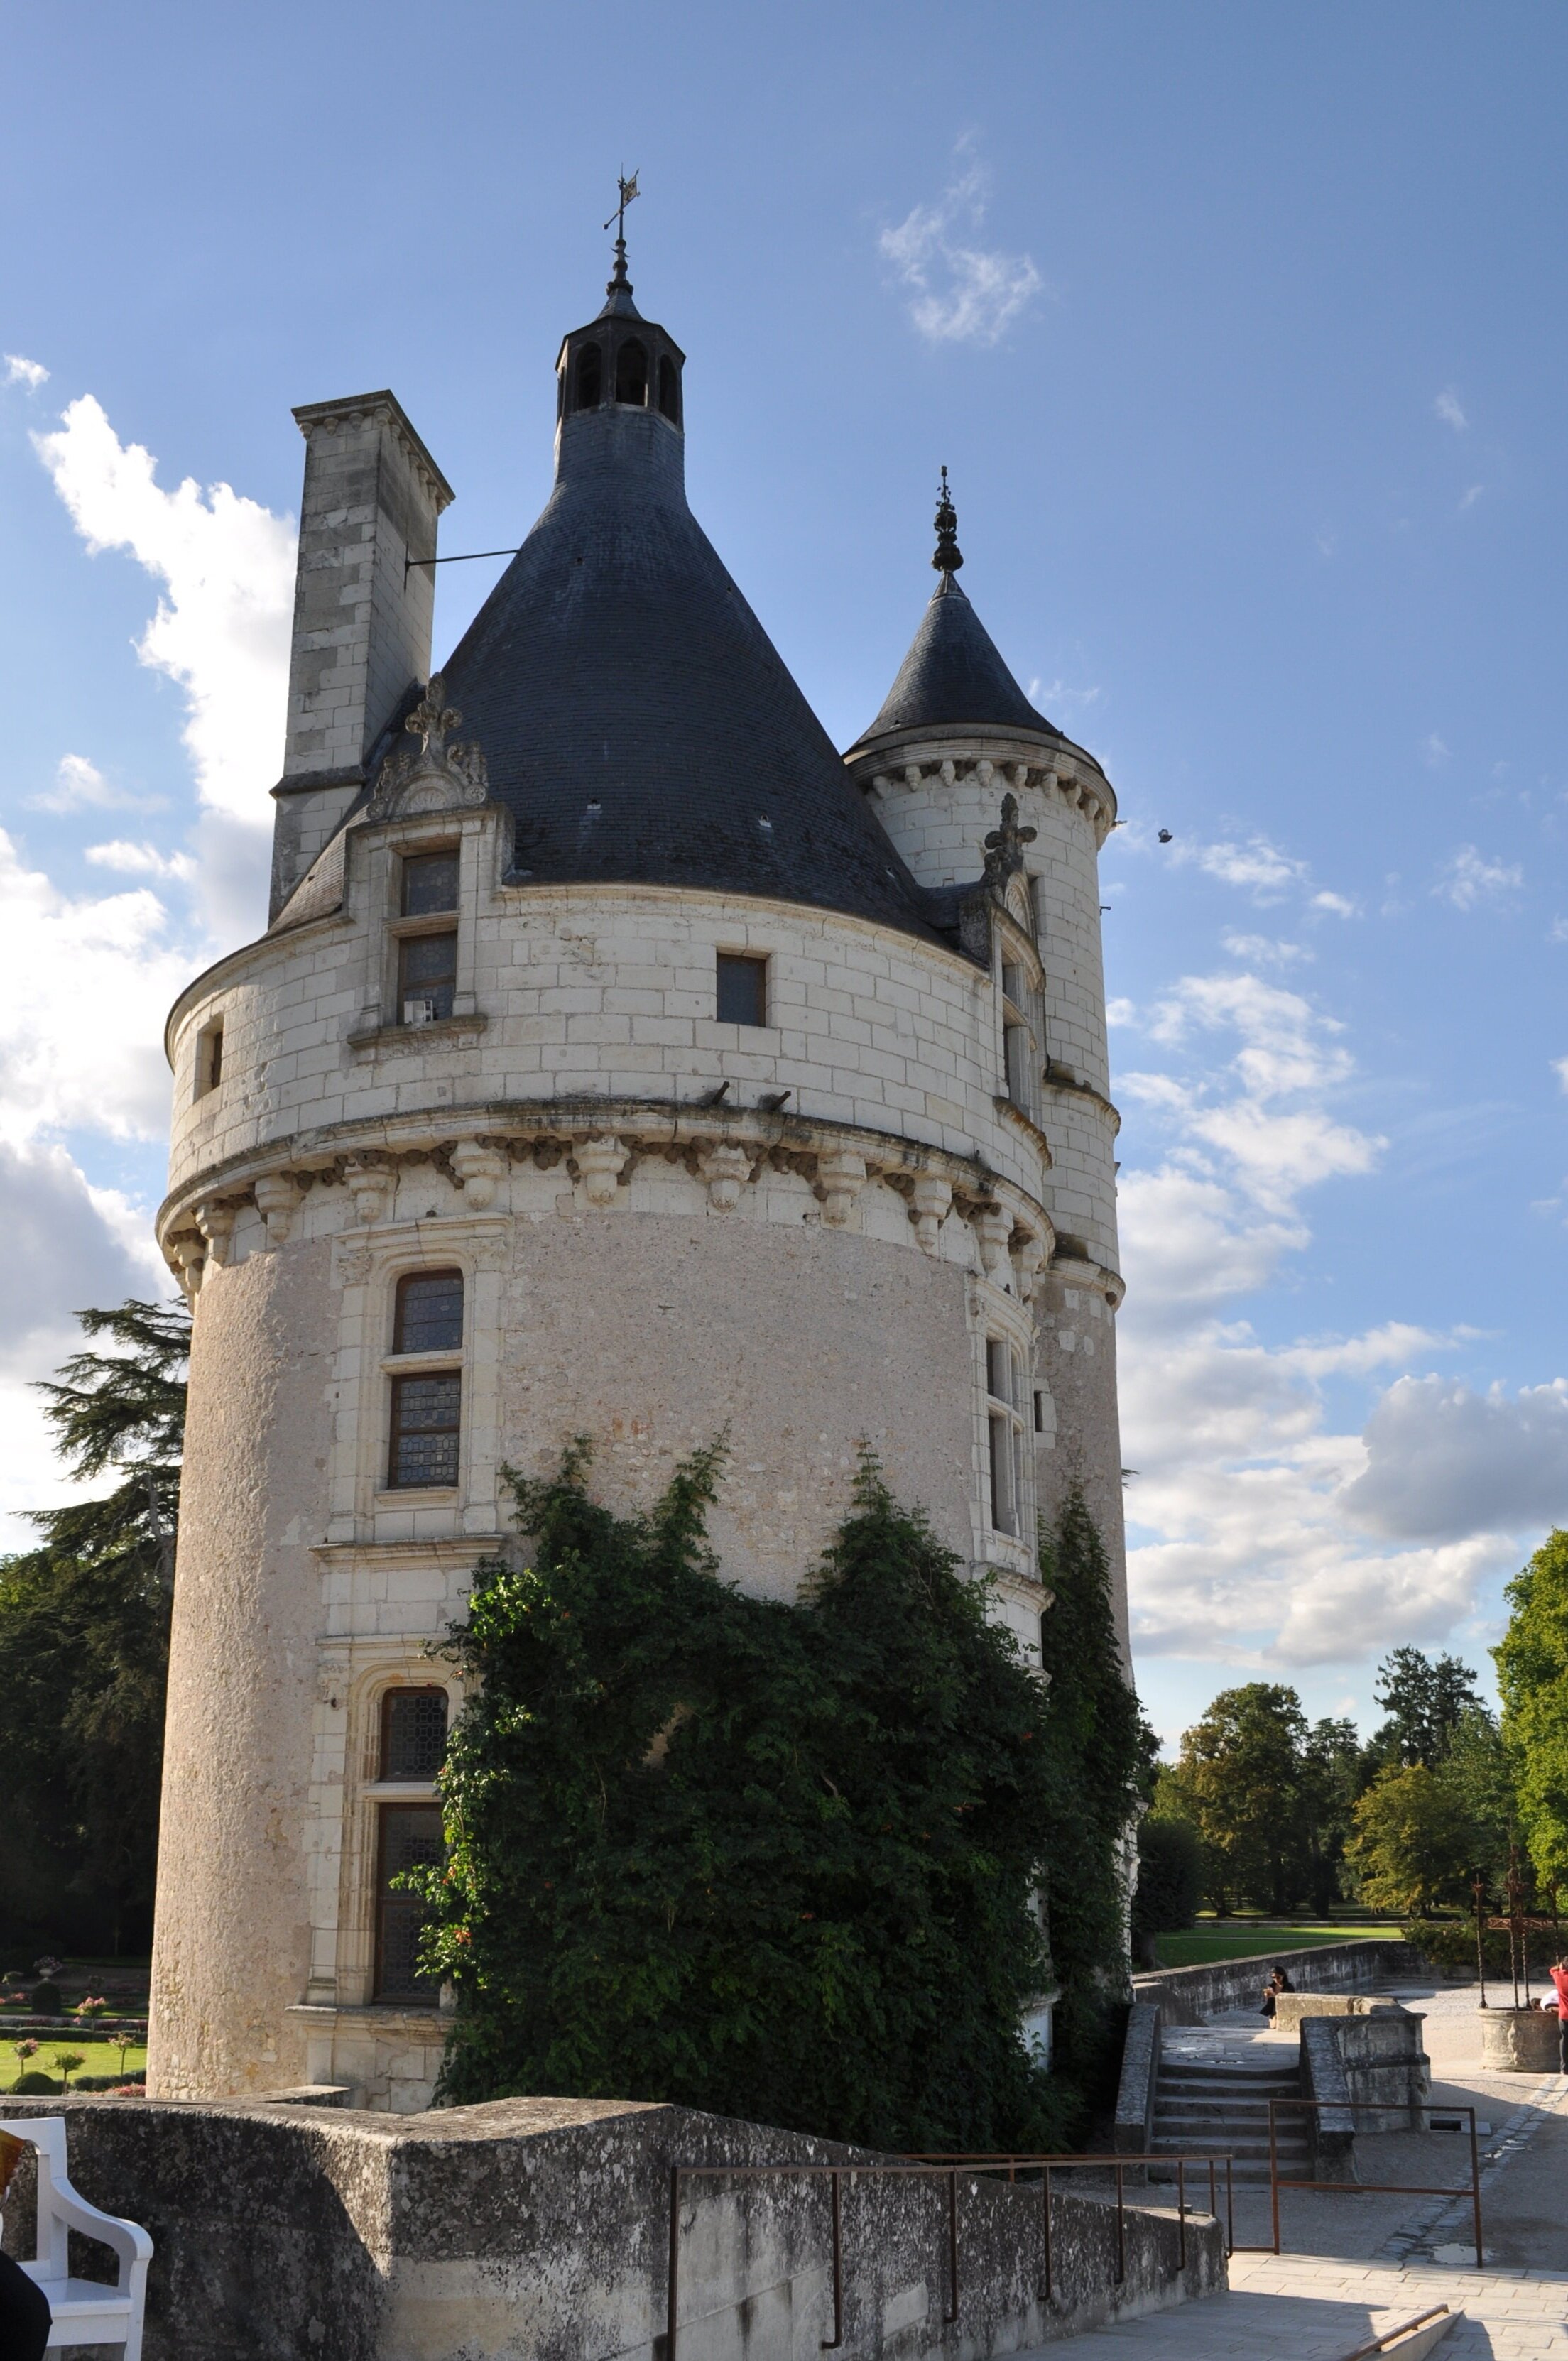 The Marques tower of Chenonceau, the remaining structure from the fortified castle which stood here before the château was built